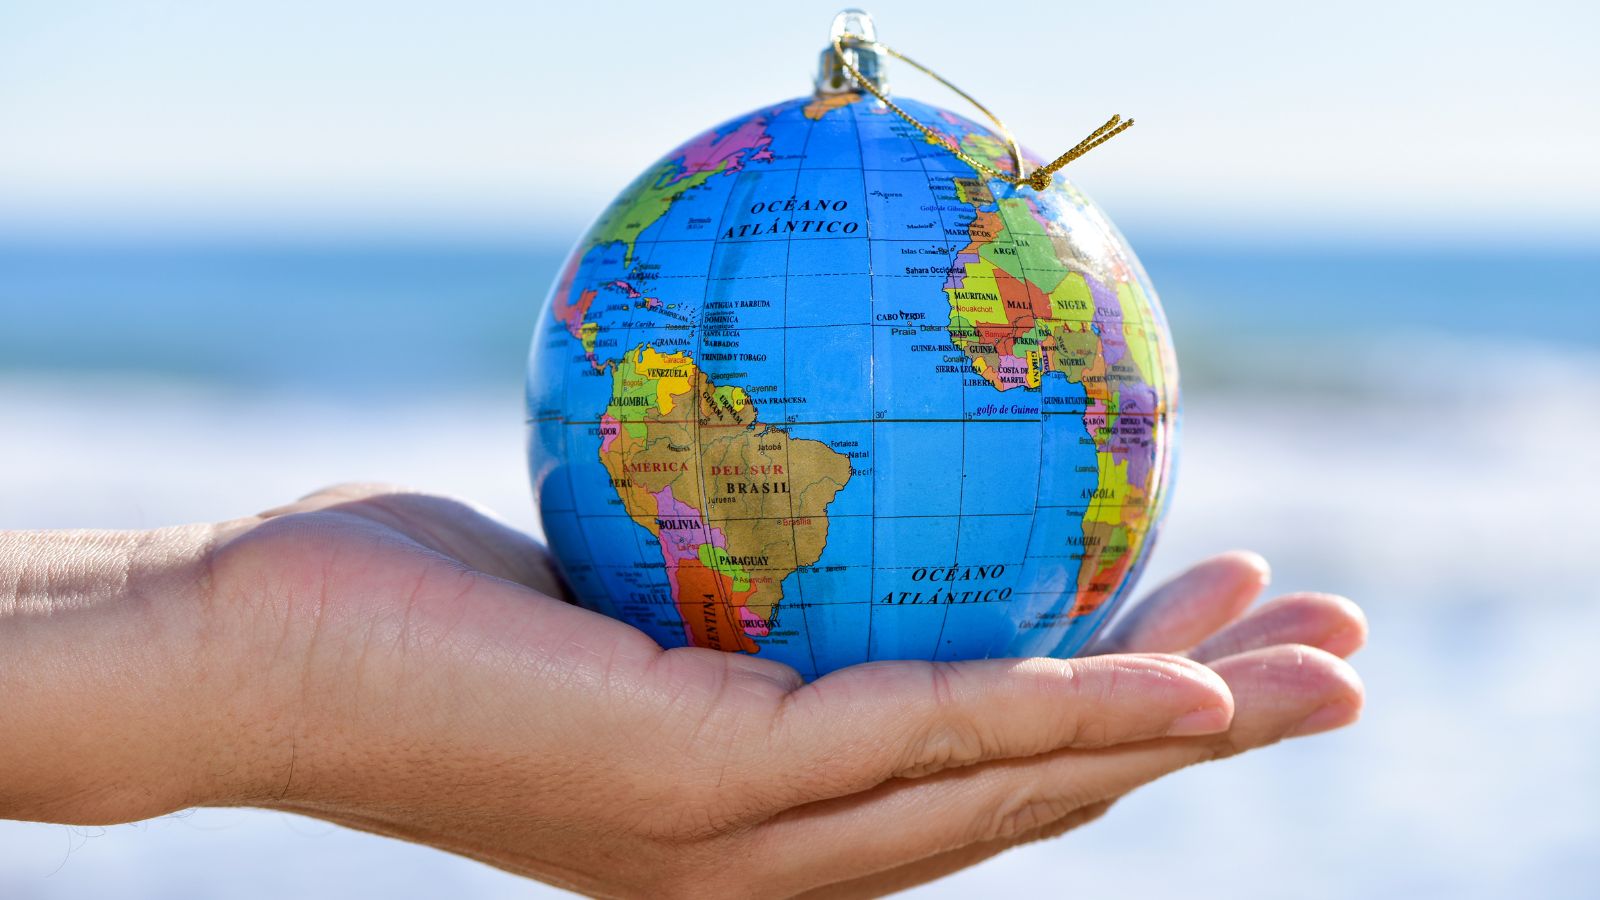 A shot of a hand holding a globe